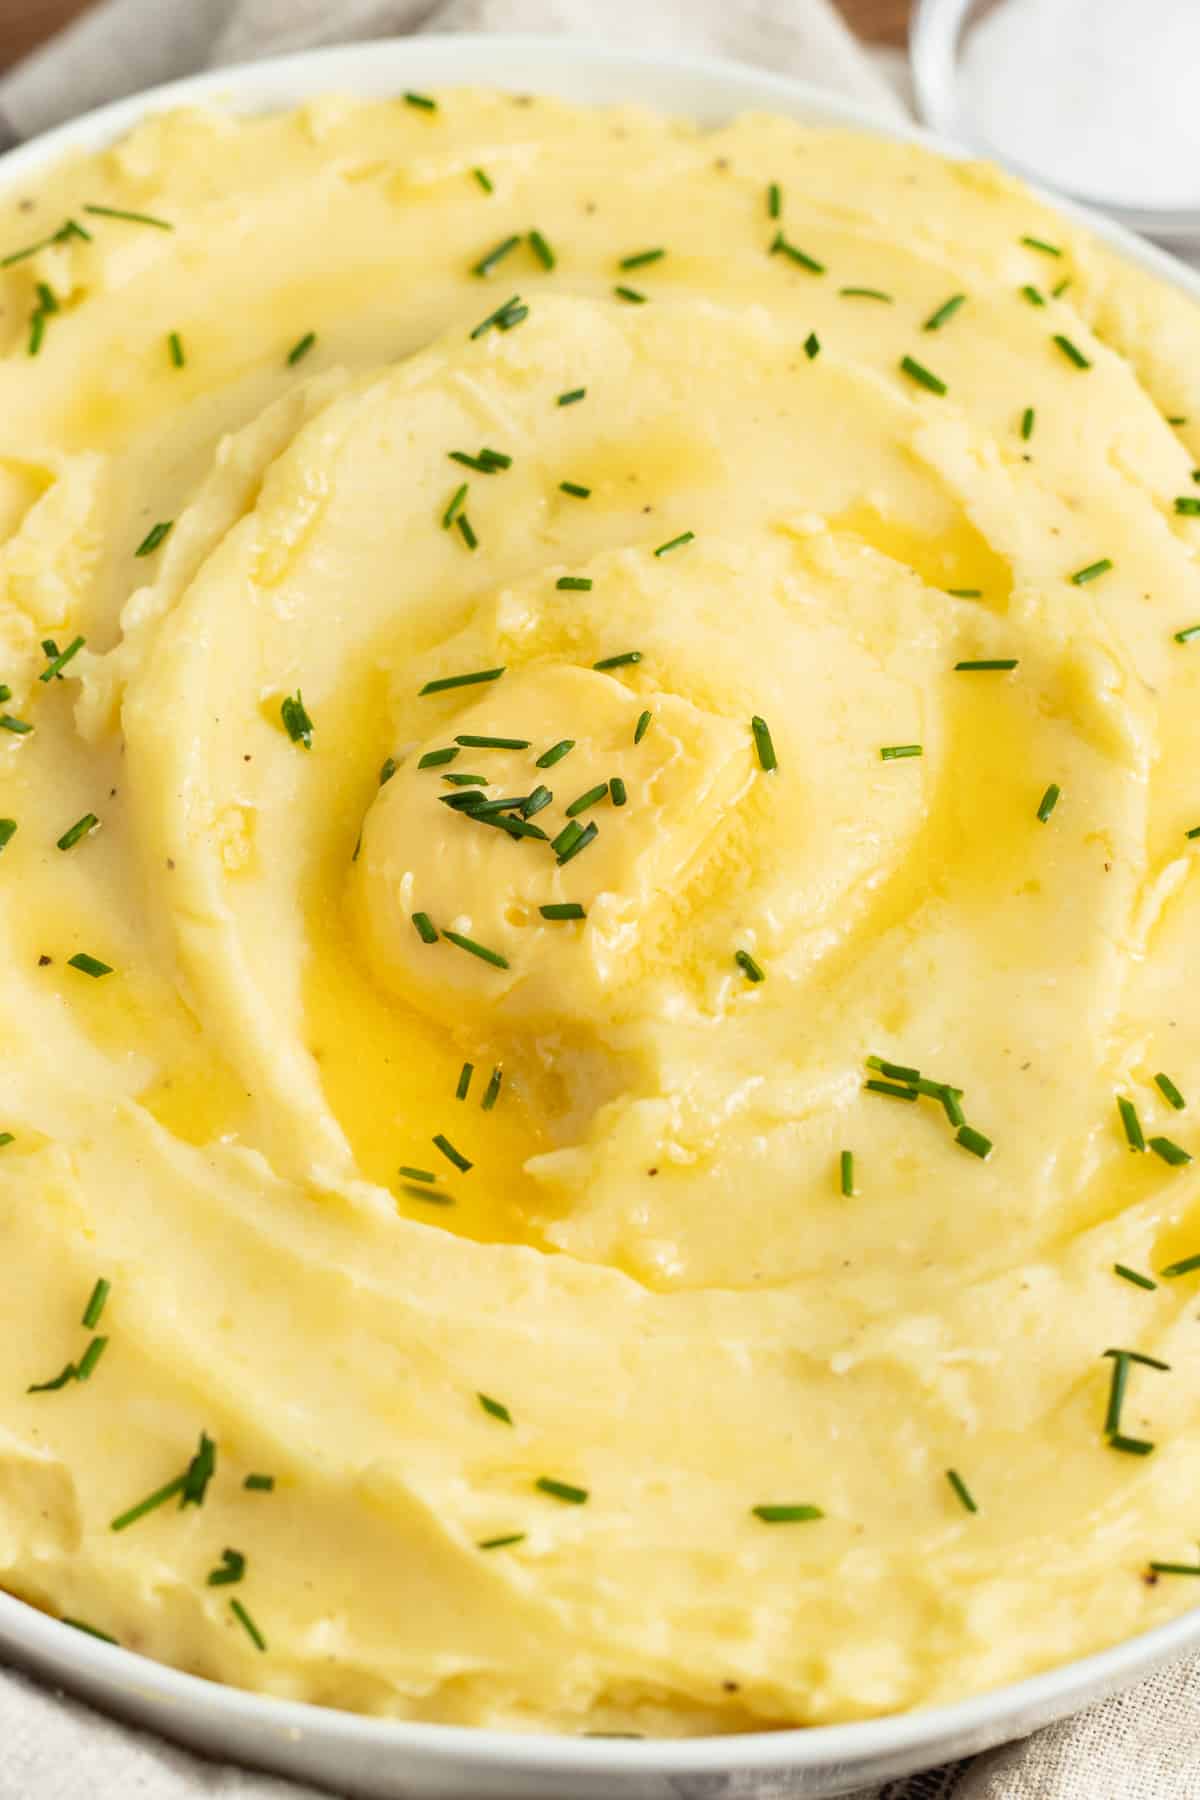 This is a picture of mashed potatoes with cottage cheese.